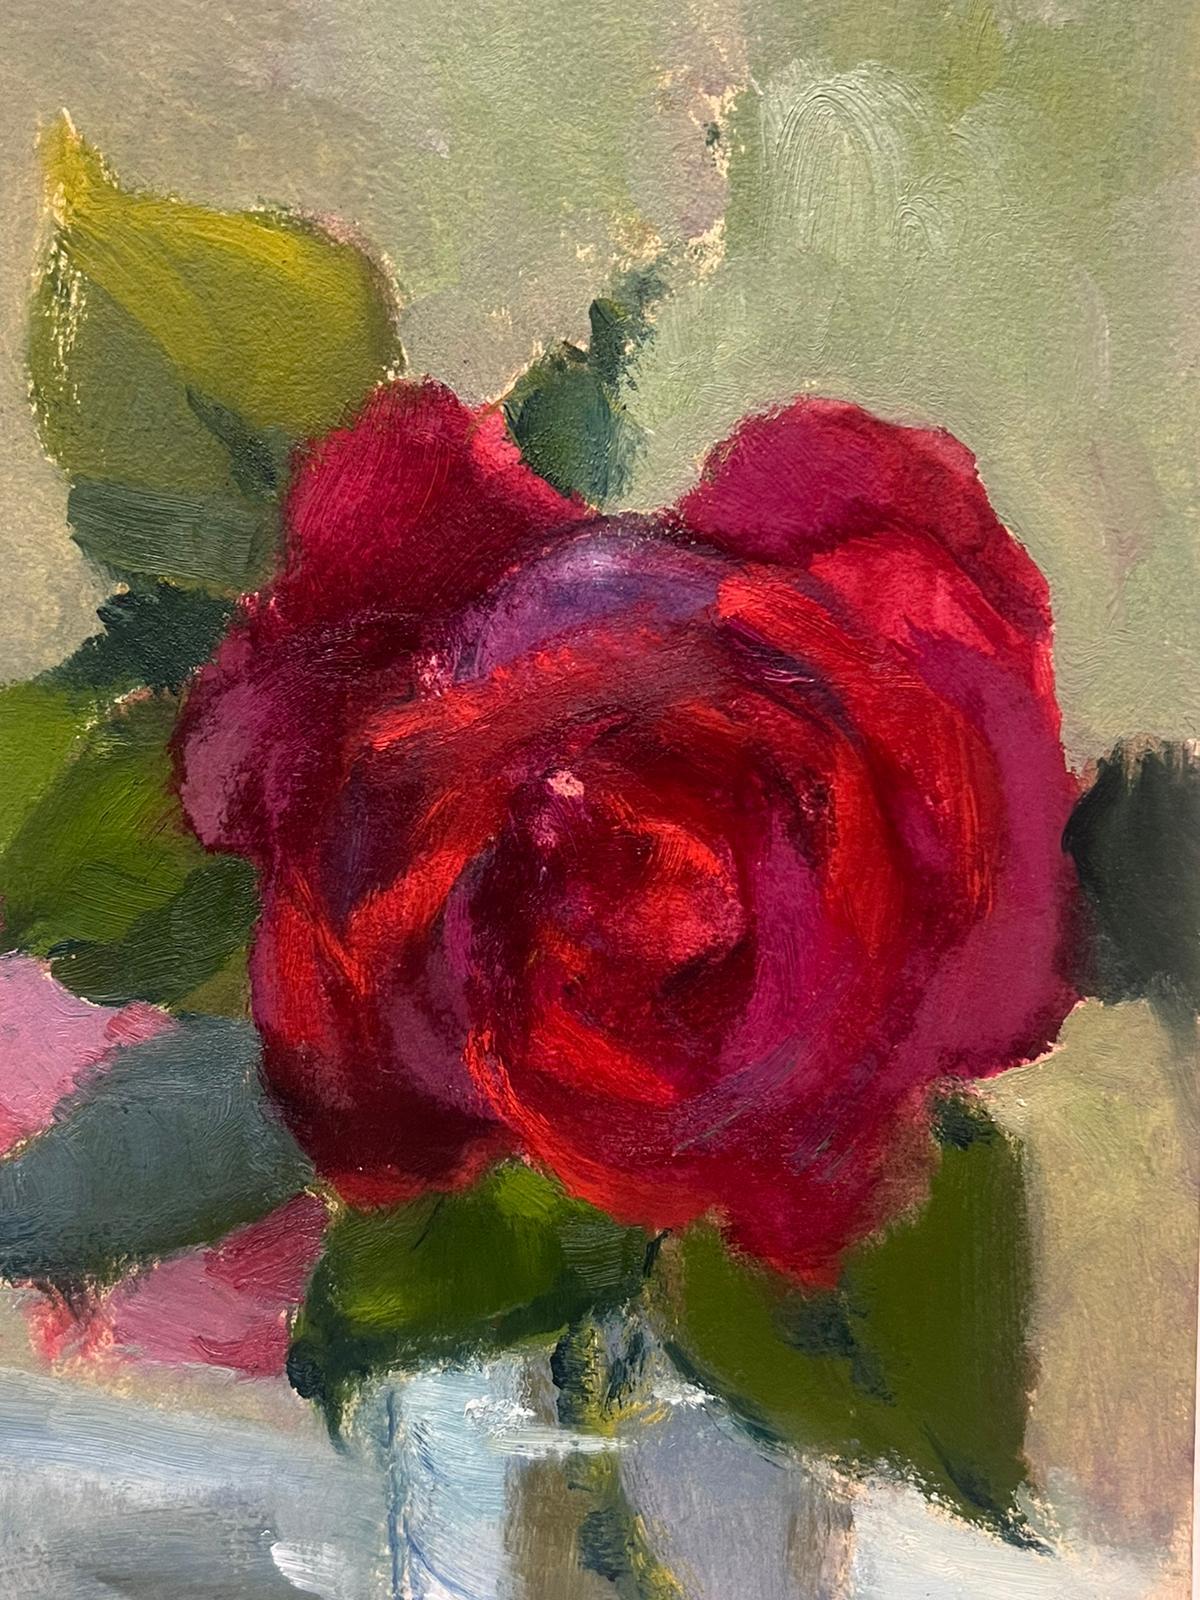 Red Rose
by Louise Alix (French, 1888-1980) *see notes below
provenance stamp to the back 
oil painting on board, unframed
measures: 7.5 high by 5 inches wide
condition: overall very good and sound, a few scuffs and marks to the surface and wear to